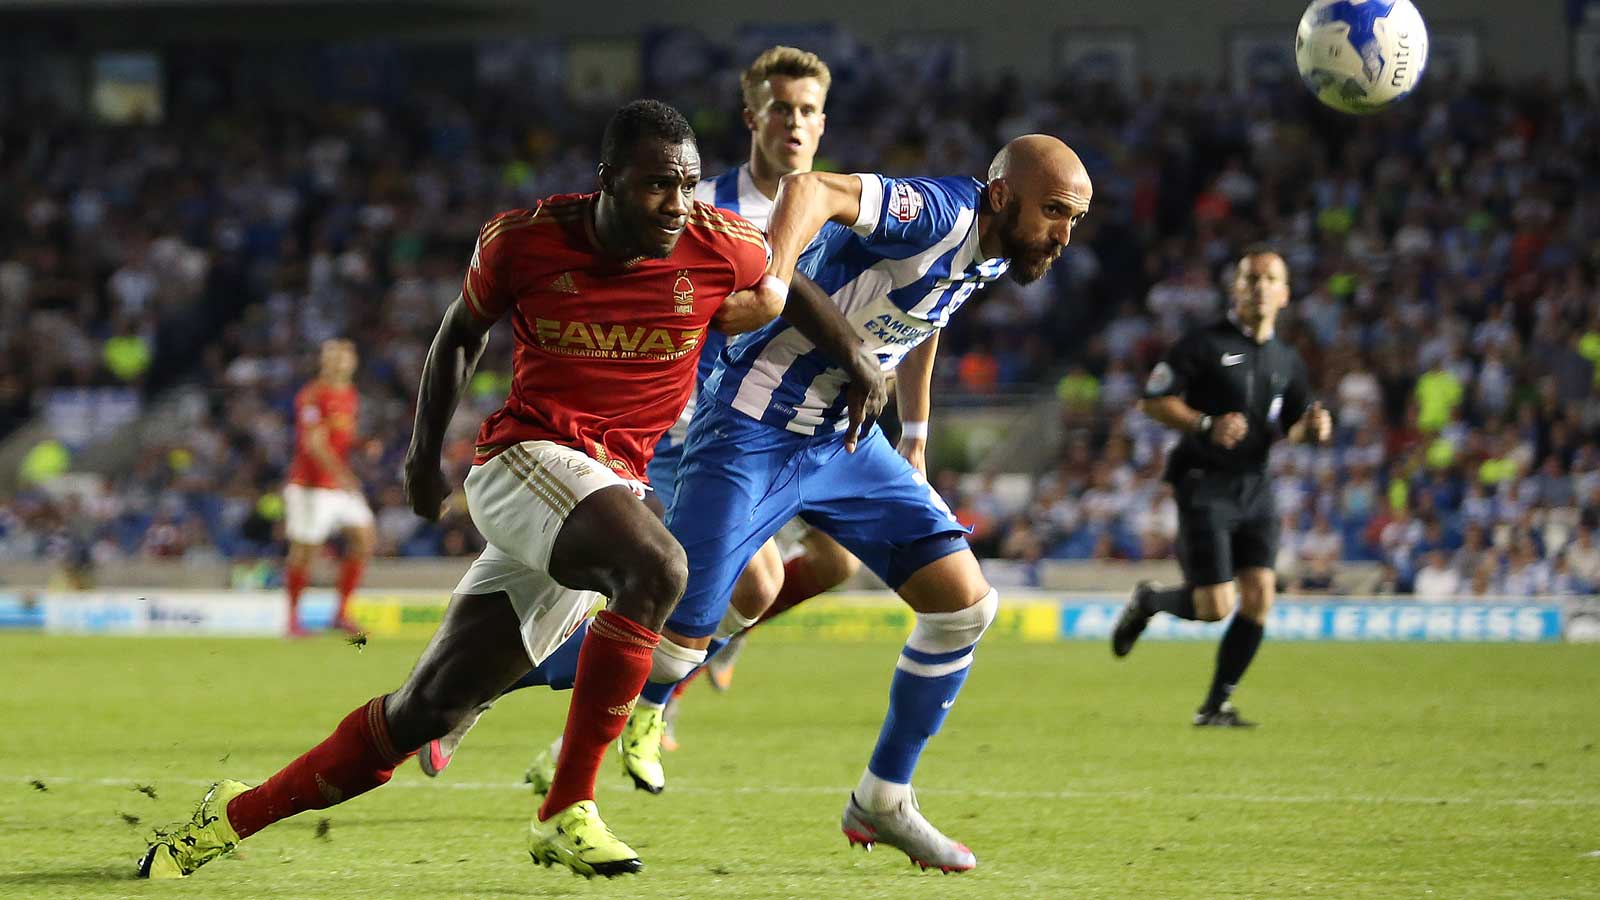 Michail Antonio in action for Nottingham Forest early in the 2015/16 season